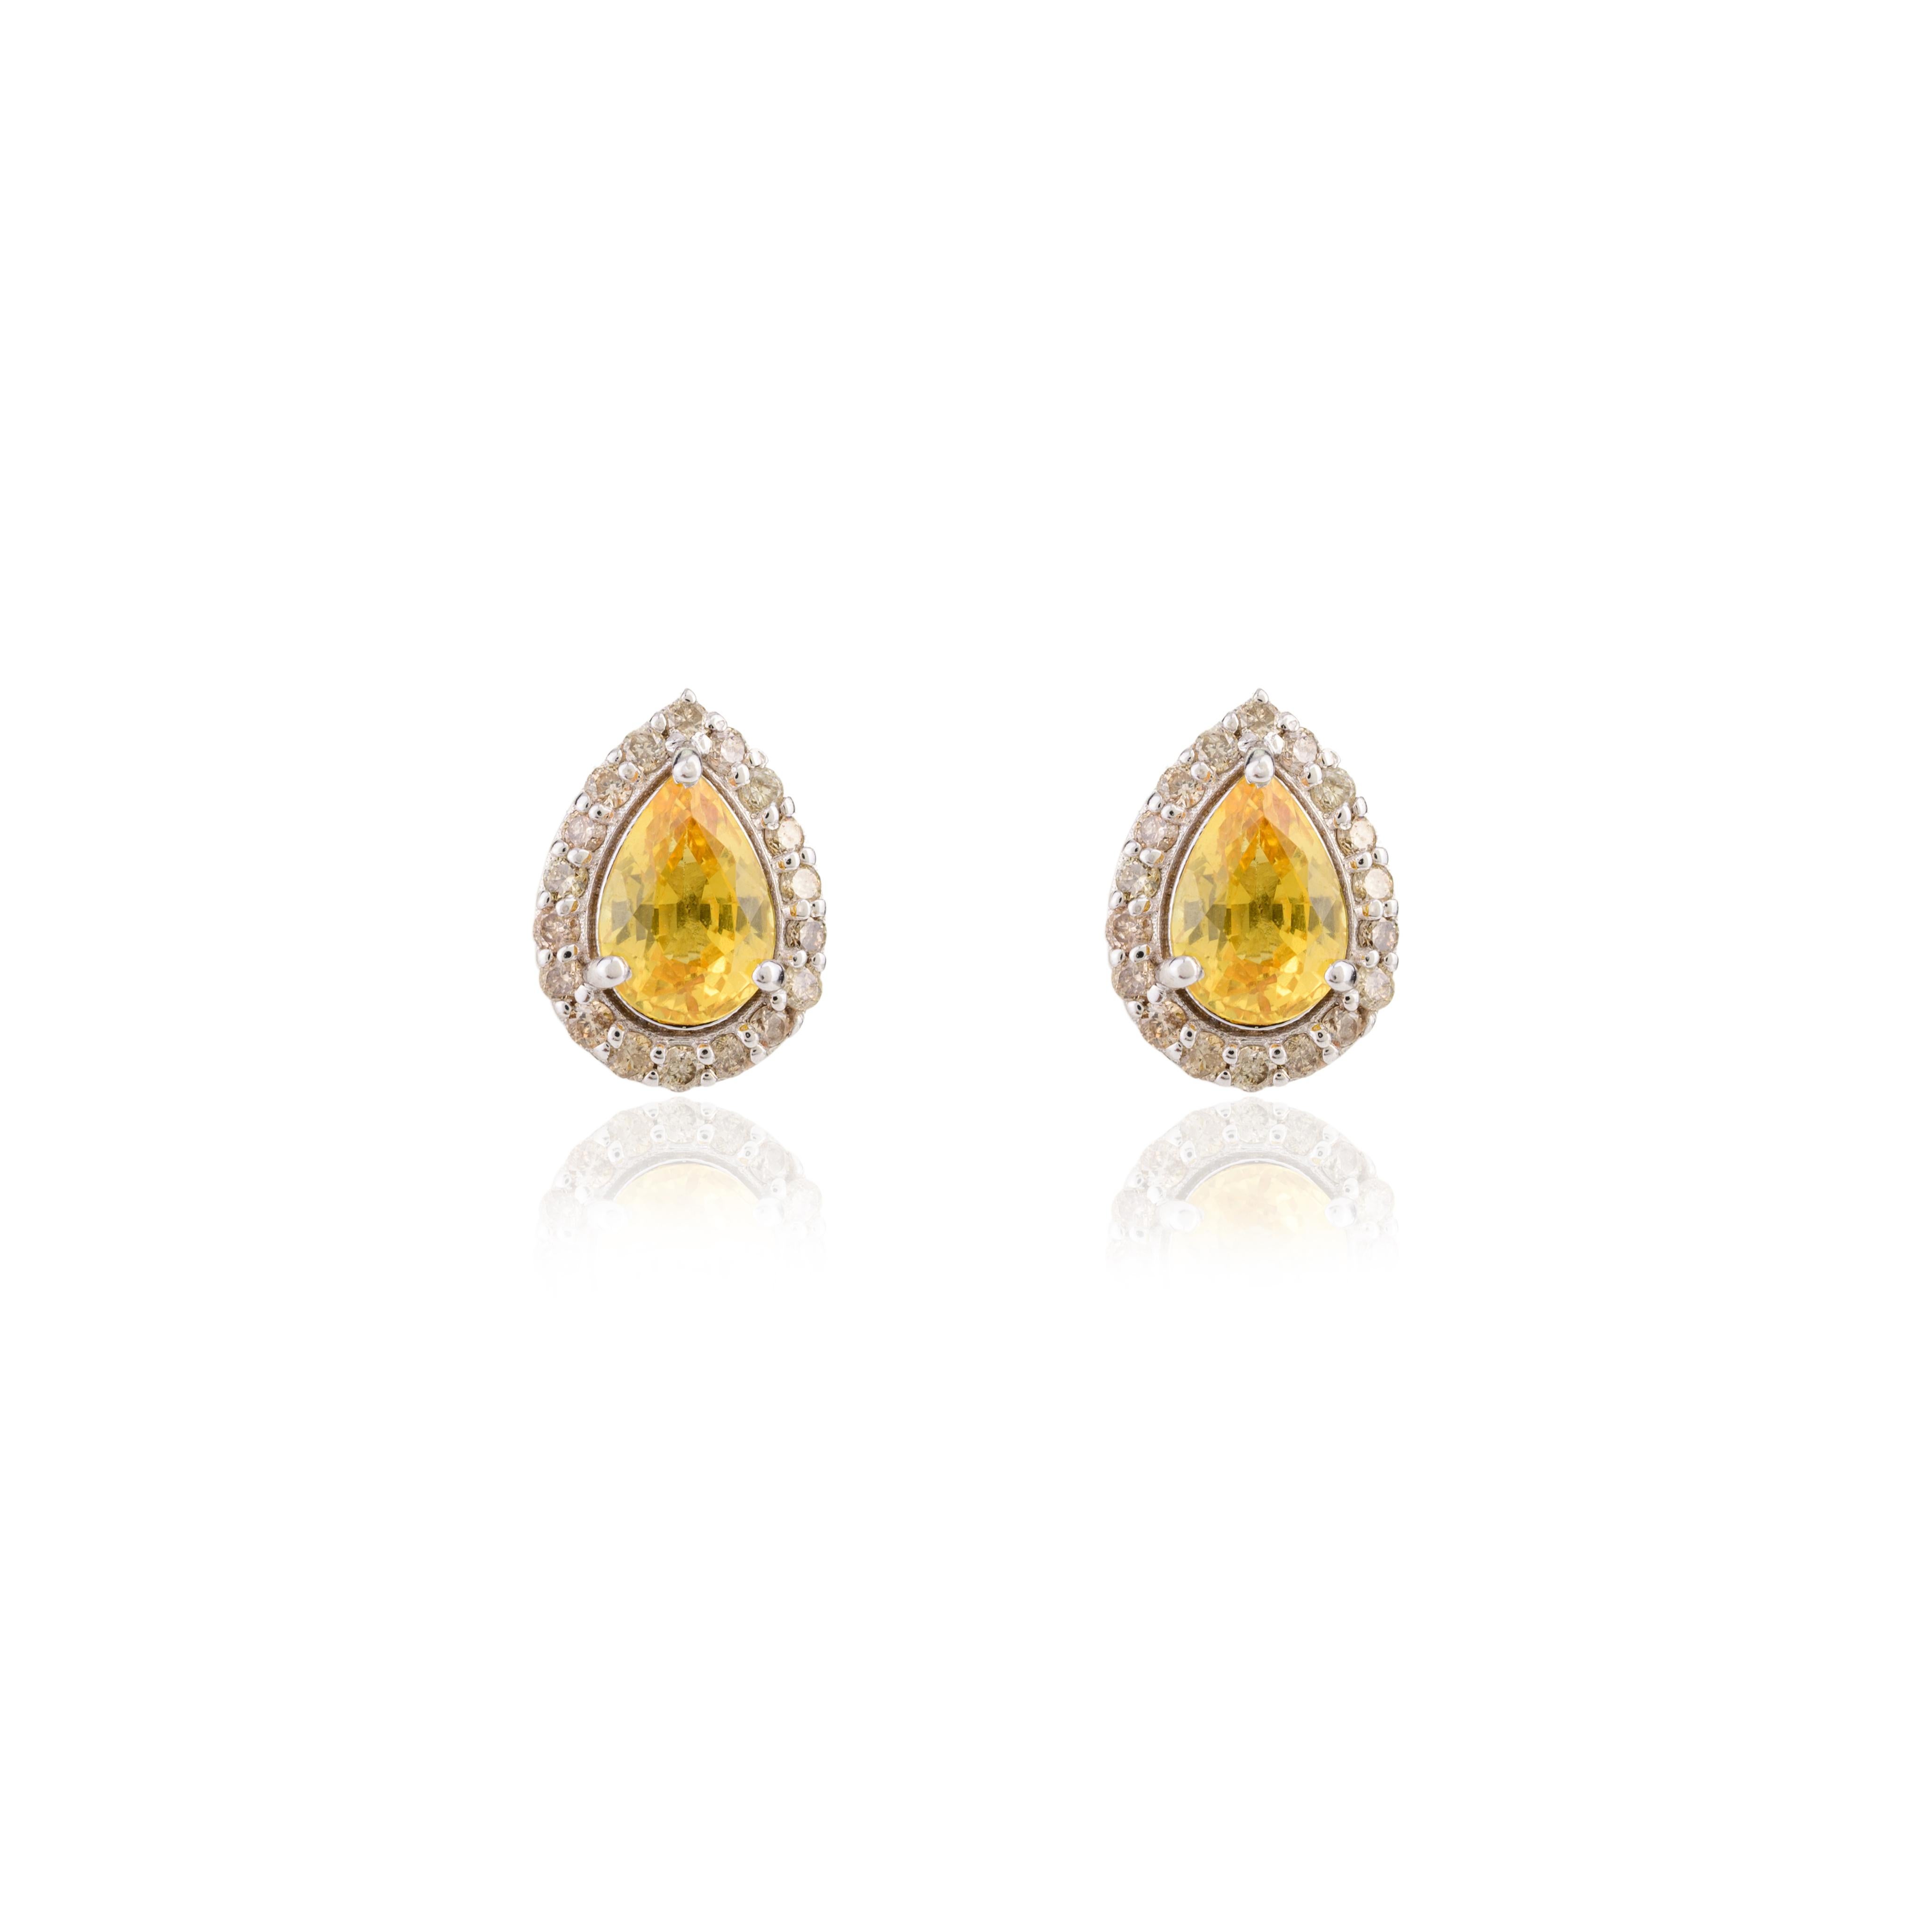 Pear Cut Everyday Yellow Sapphire and Diamond Stud Earrings in 18k Solid White Gold